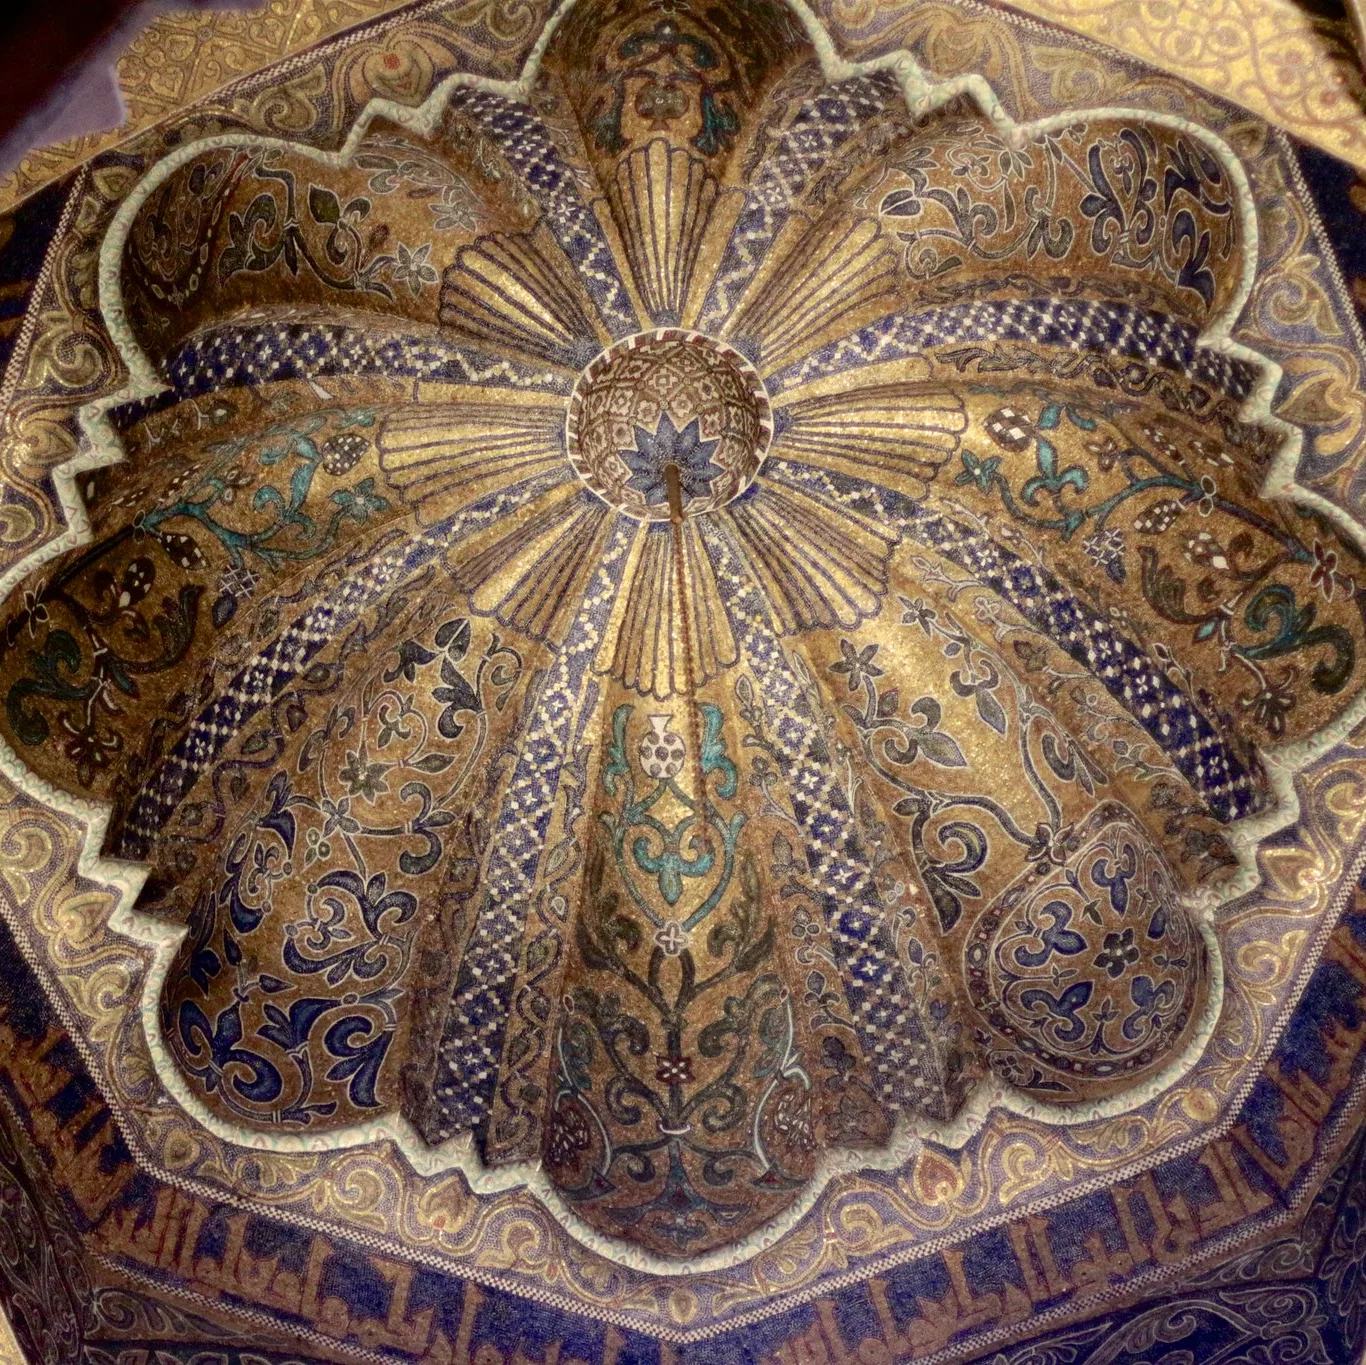 Dome above the mihrab